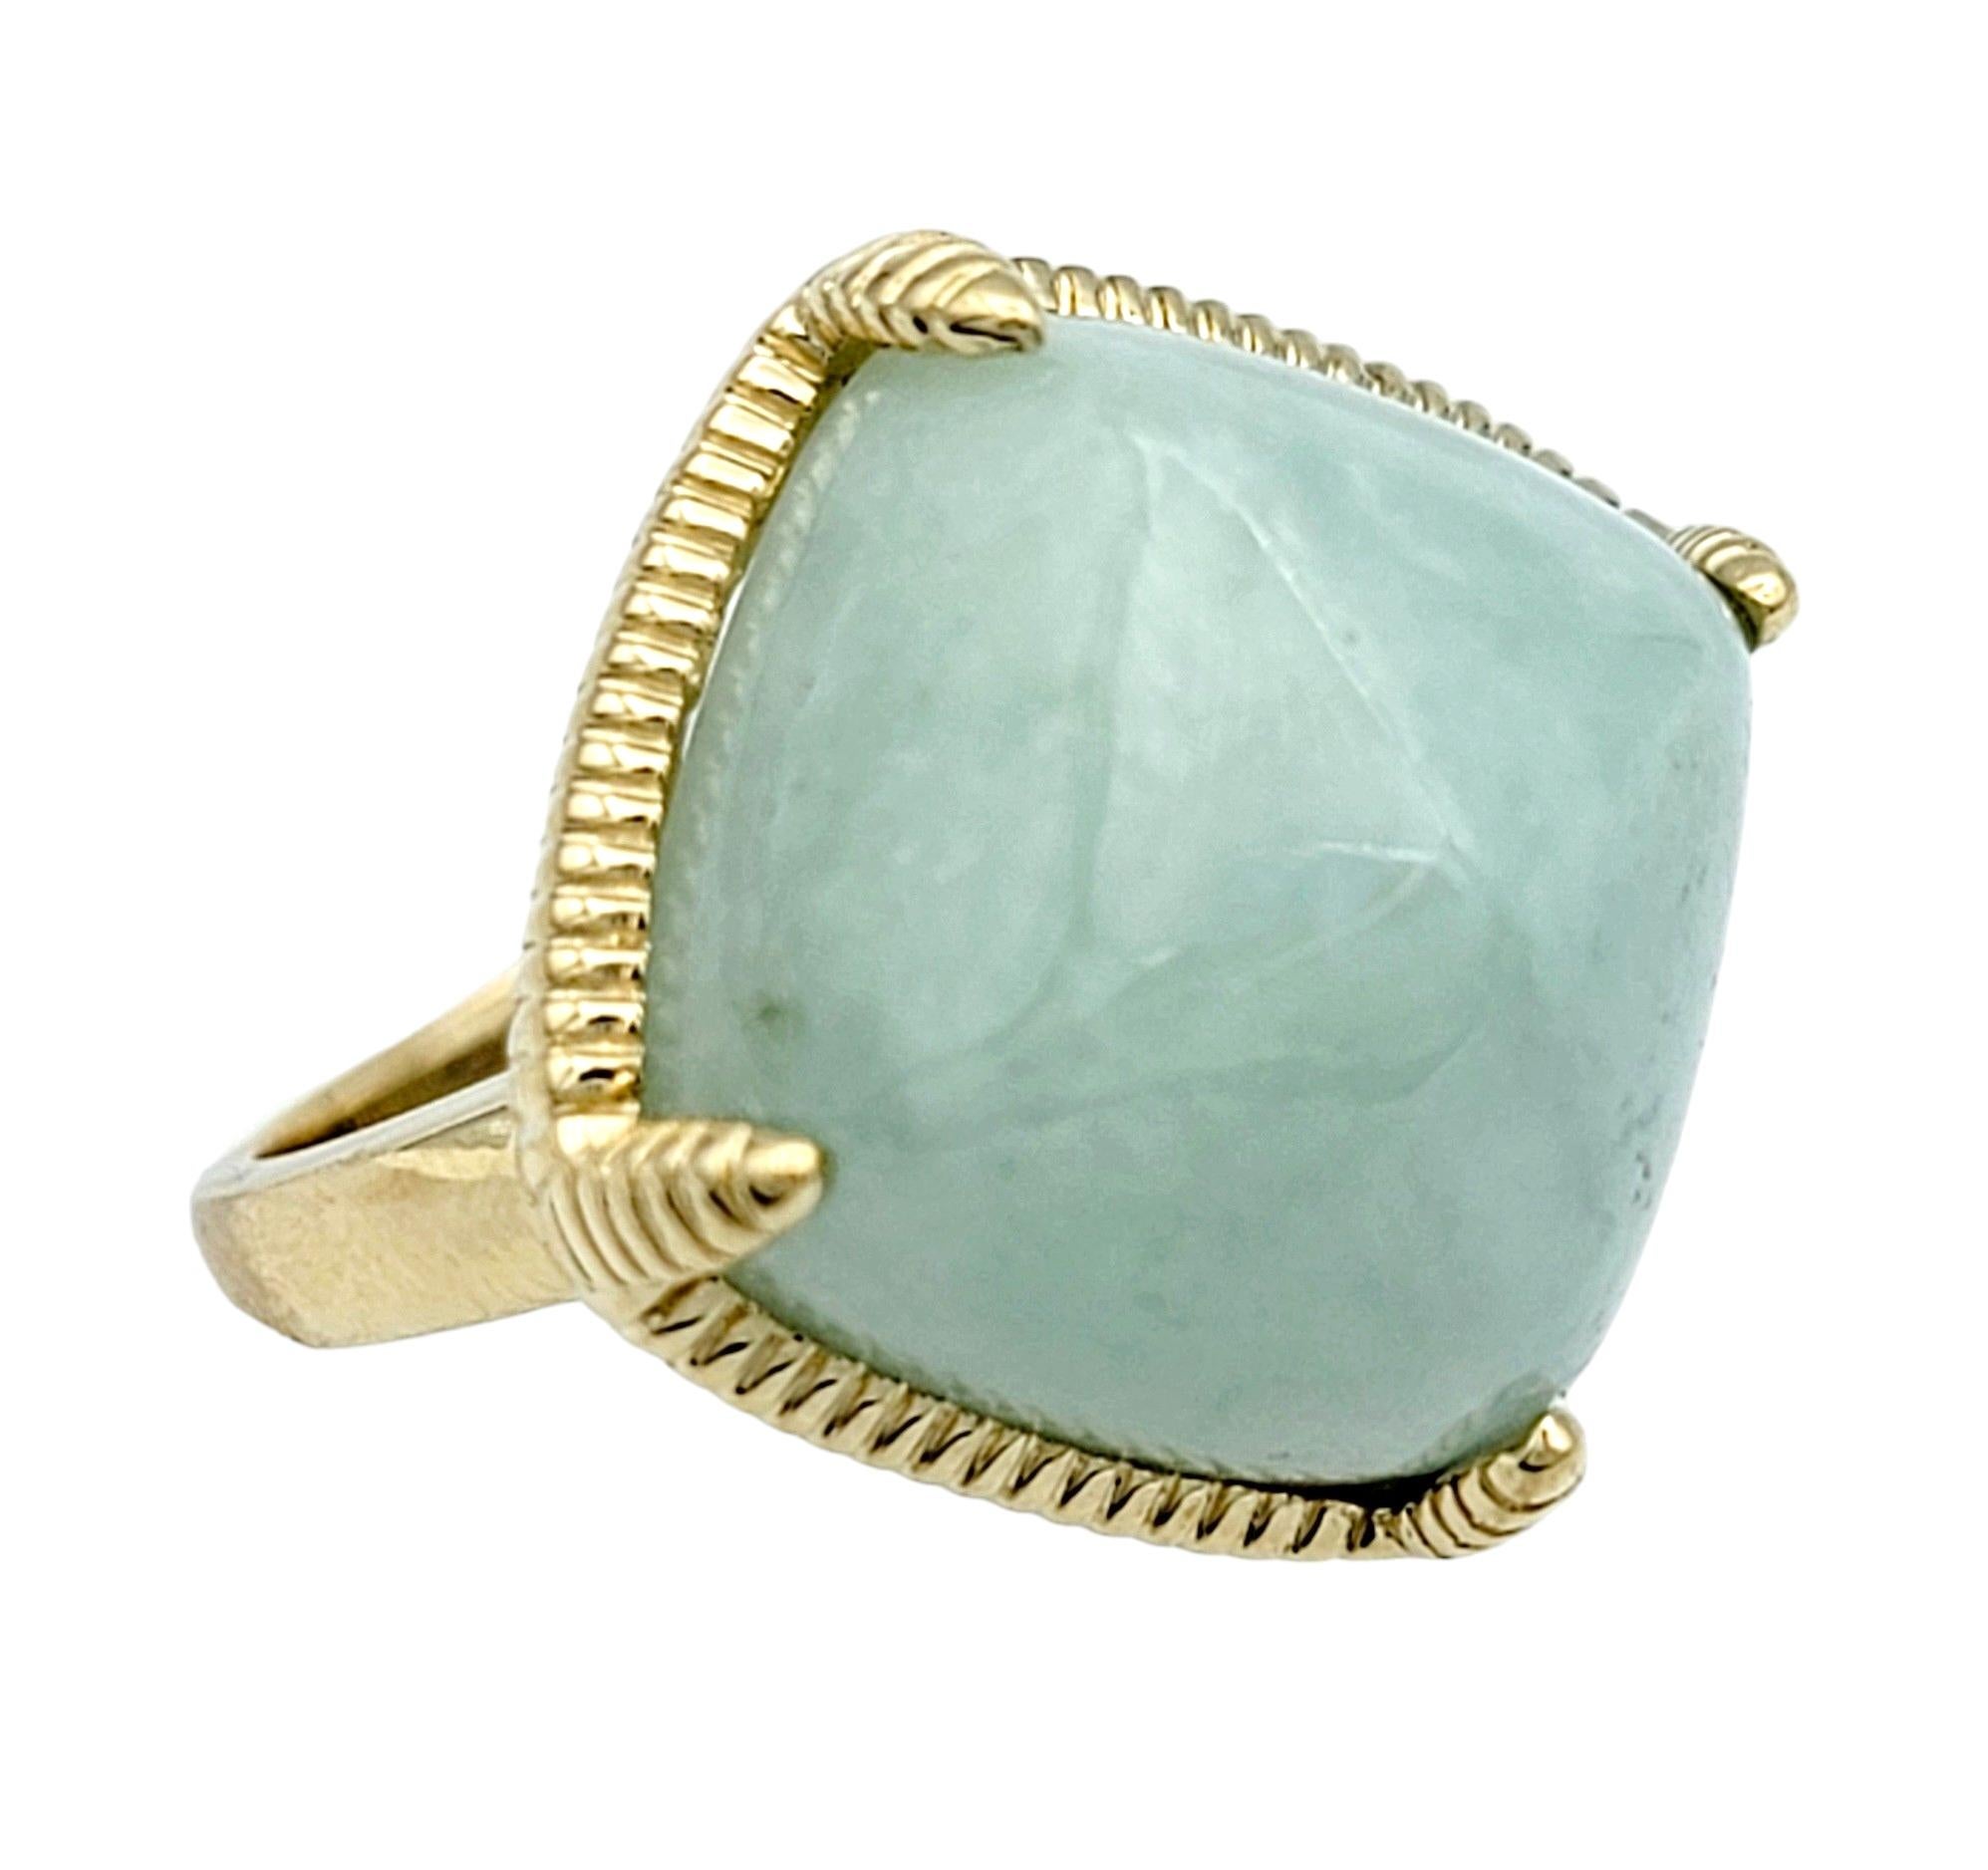 Ring Size: 7

This squared cabochon jade ring, set in a ridged 14 karat yellow gold setting, is a stunning blend of classic elegance and natural beauty. The squared shape of the cabochon jade creates a unique focal point, drawing the eye with its